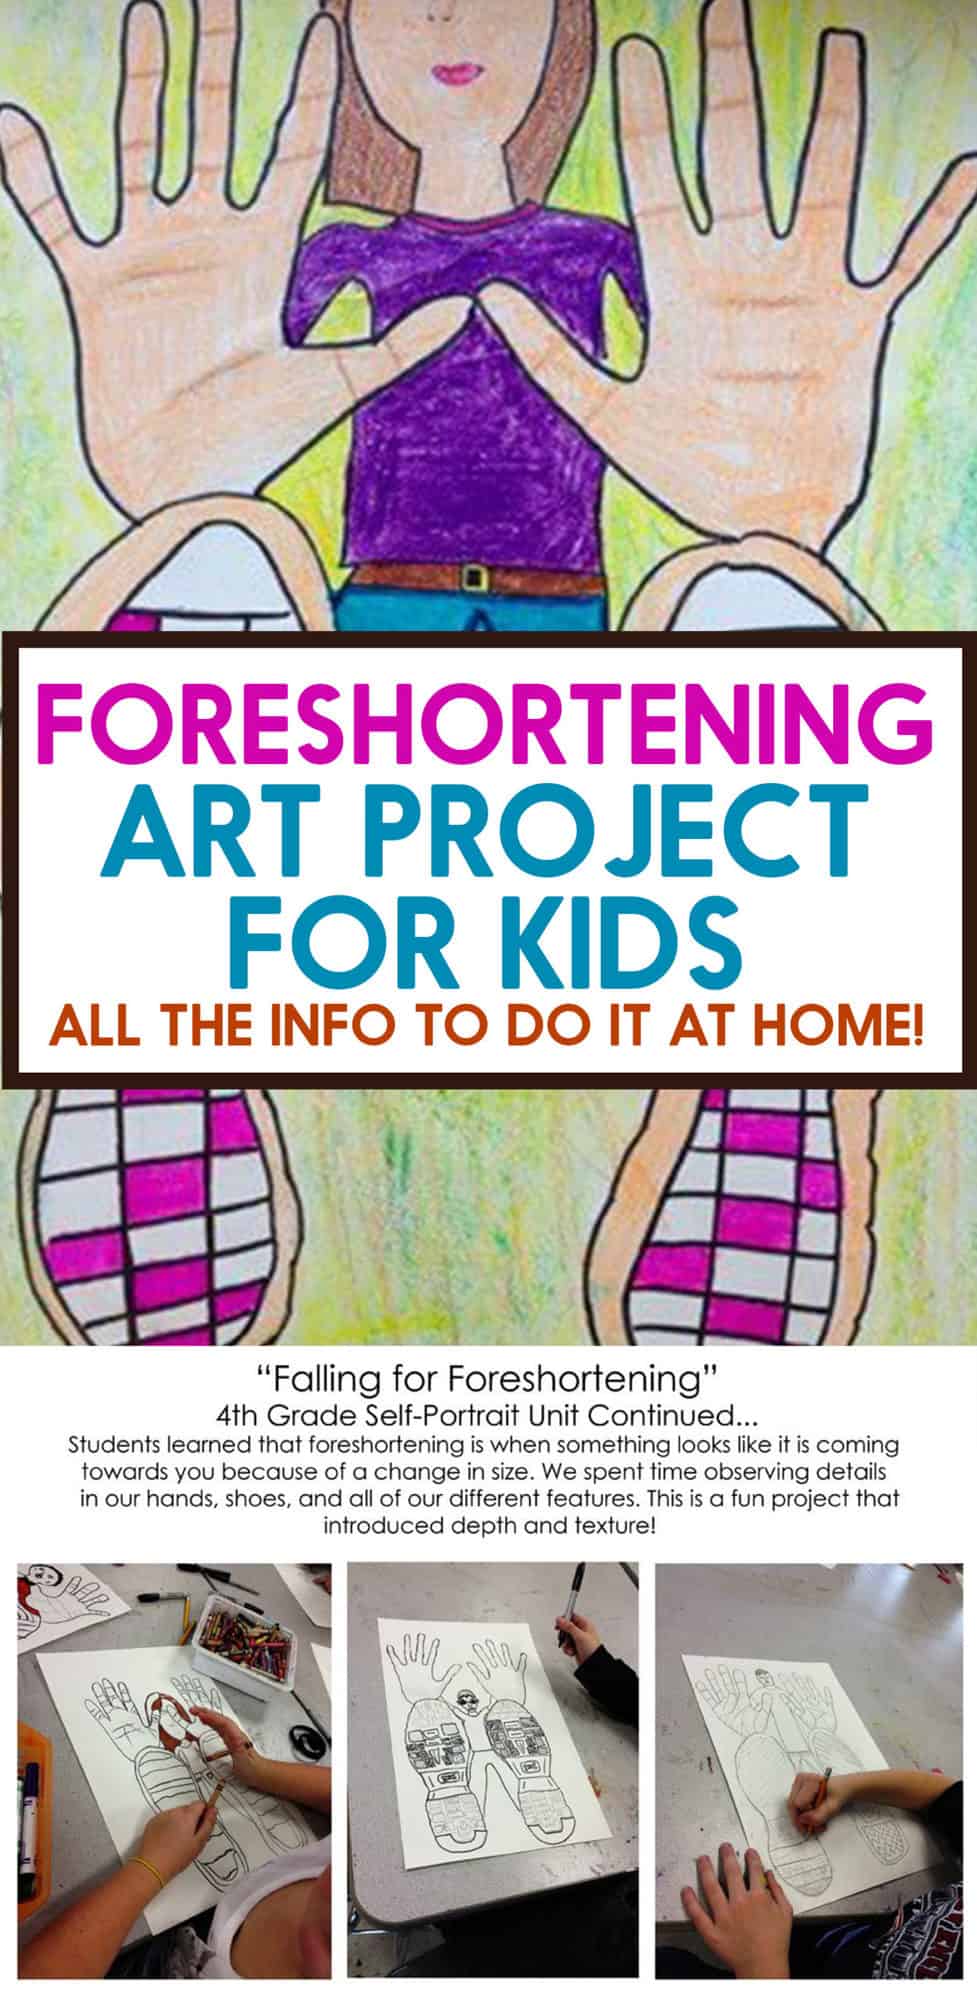 Foreshortening Art Project for Kids